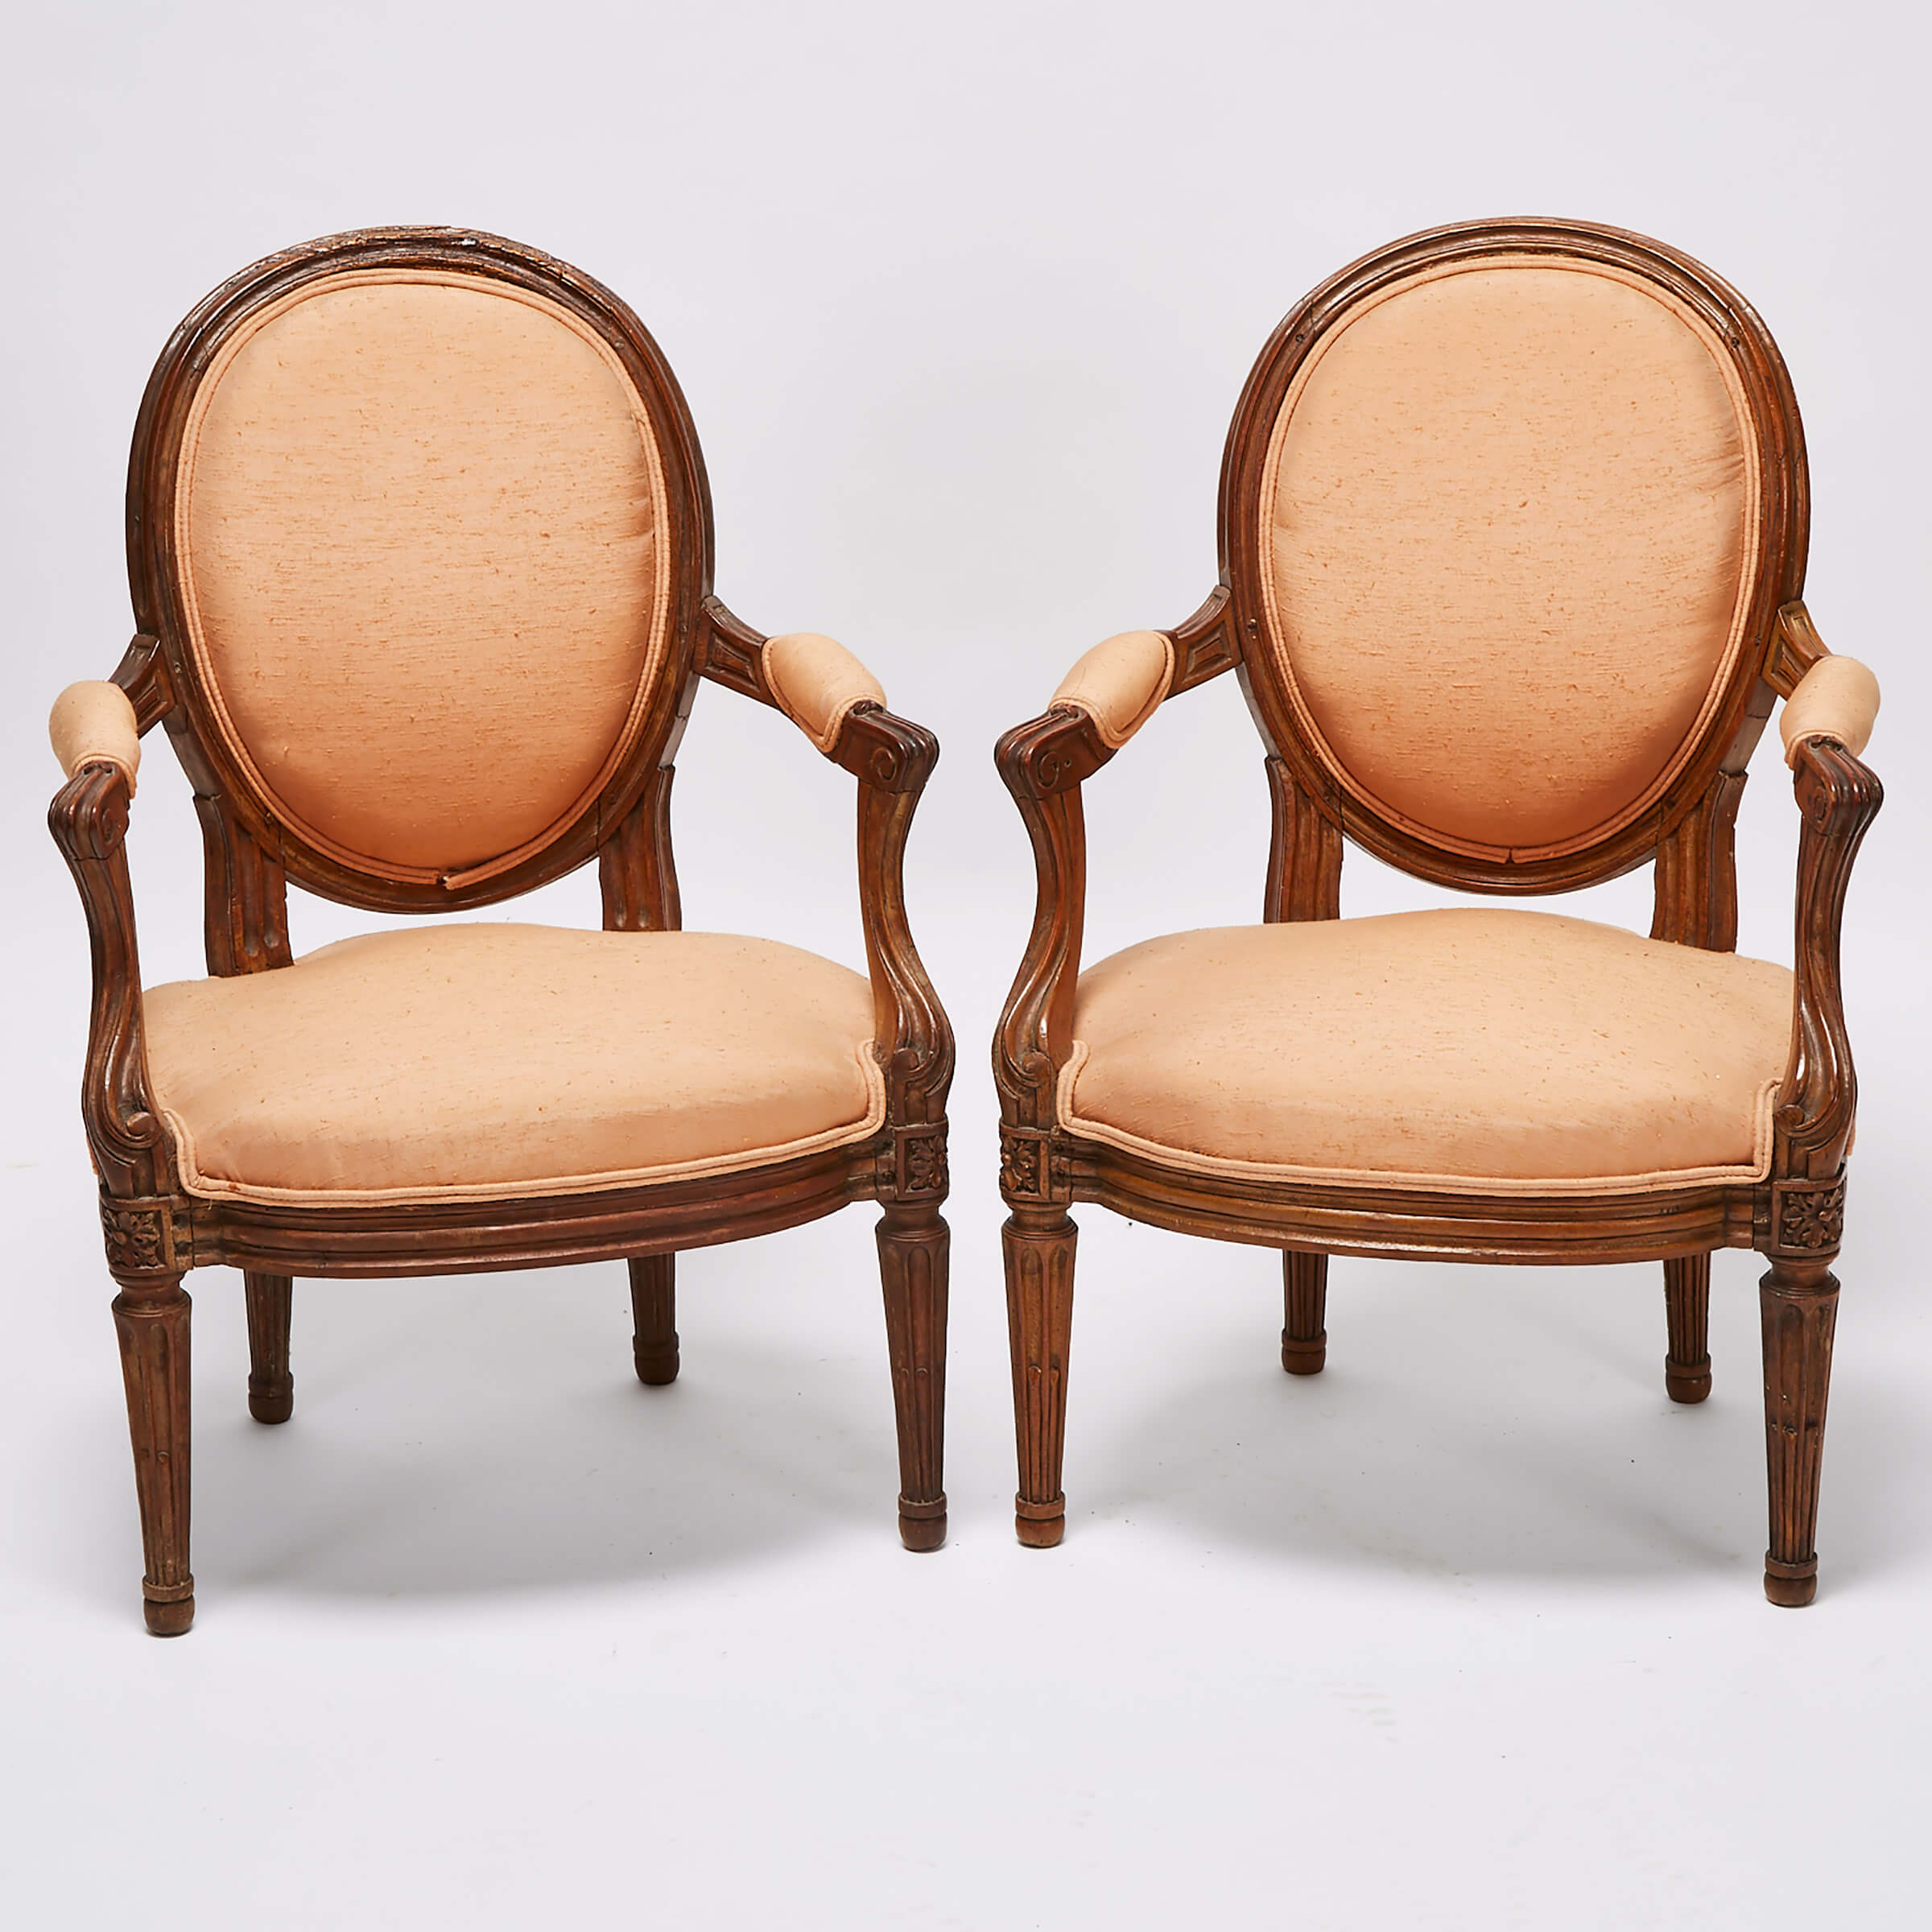 Pair of French Provincial Children’s Walnut Fauteuils, 19th century